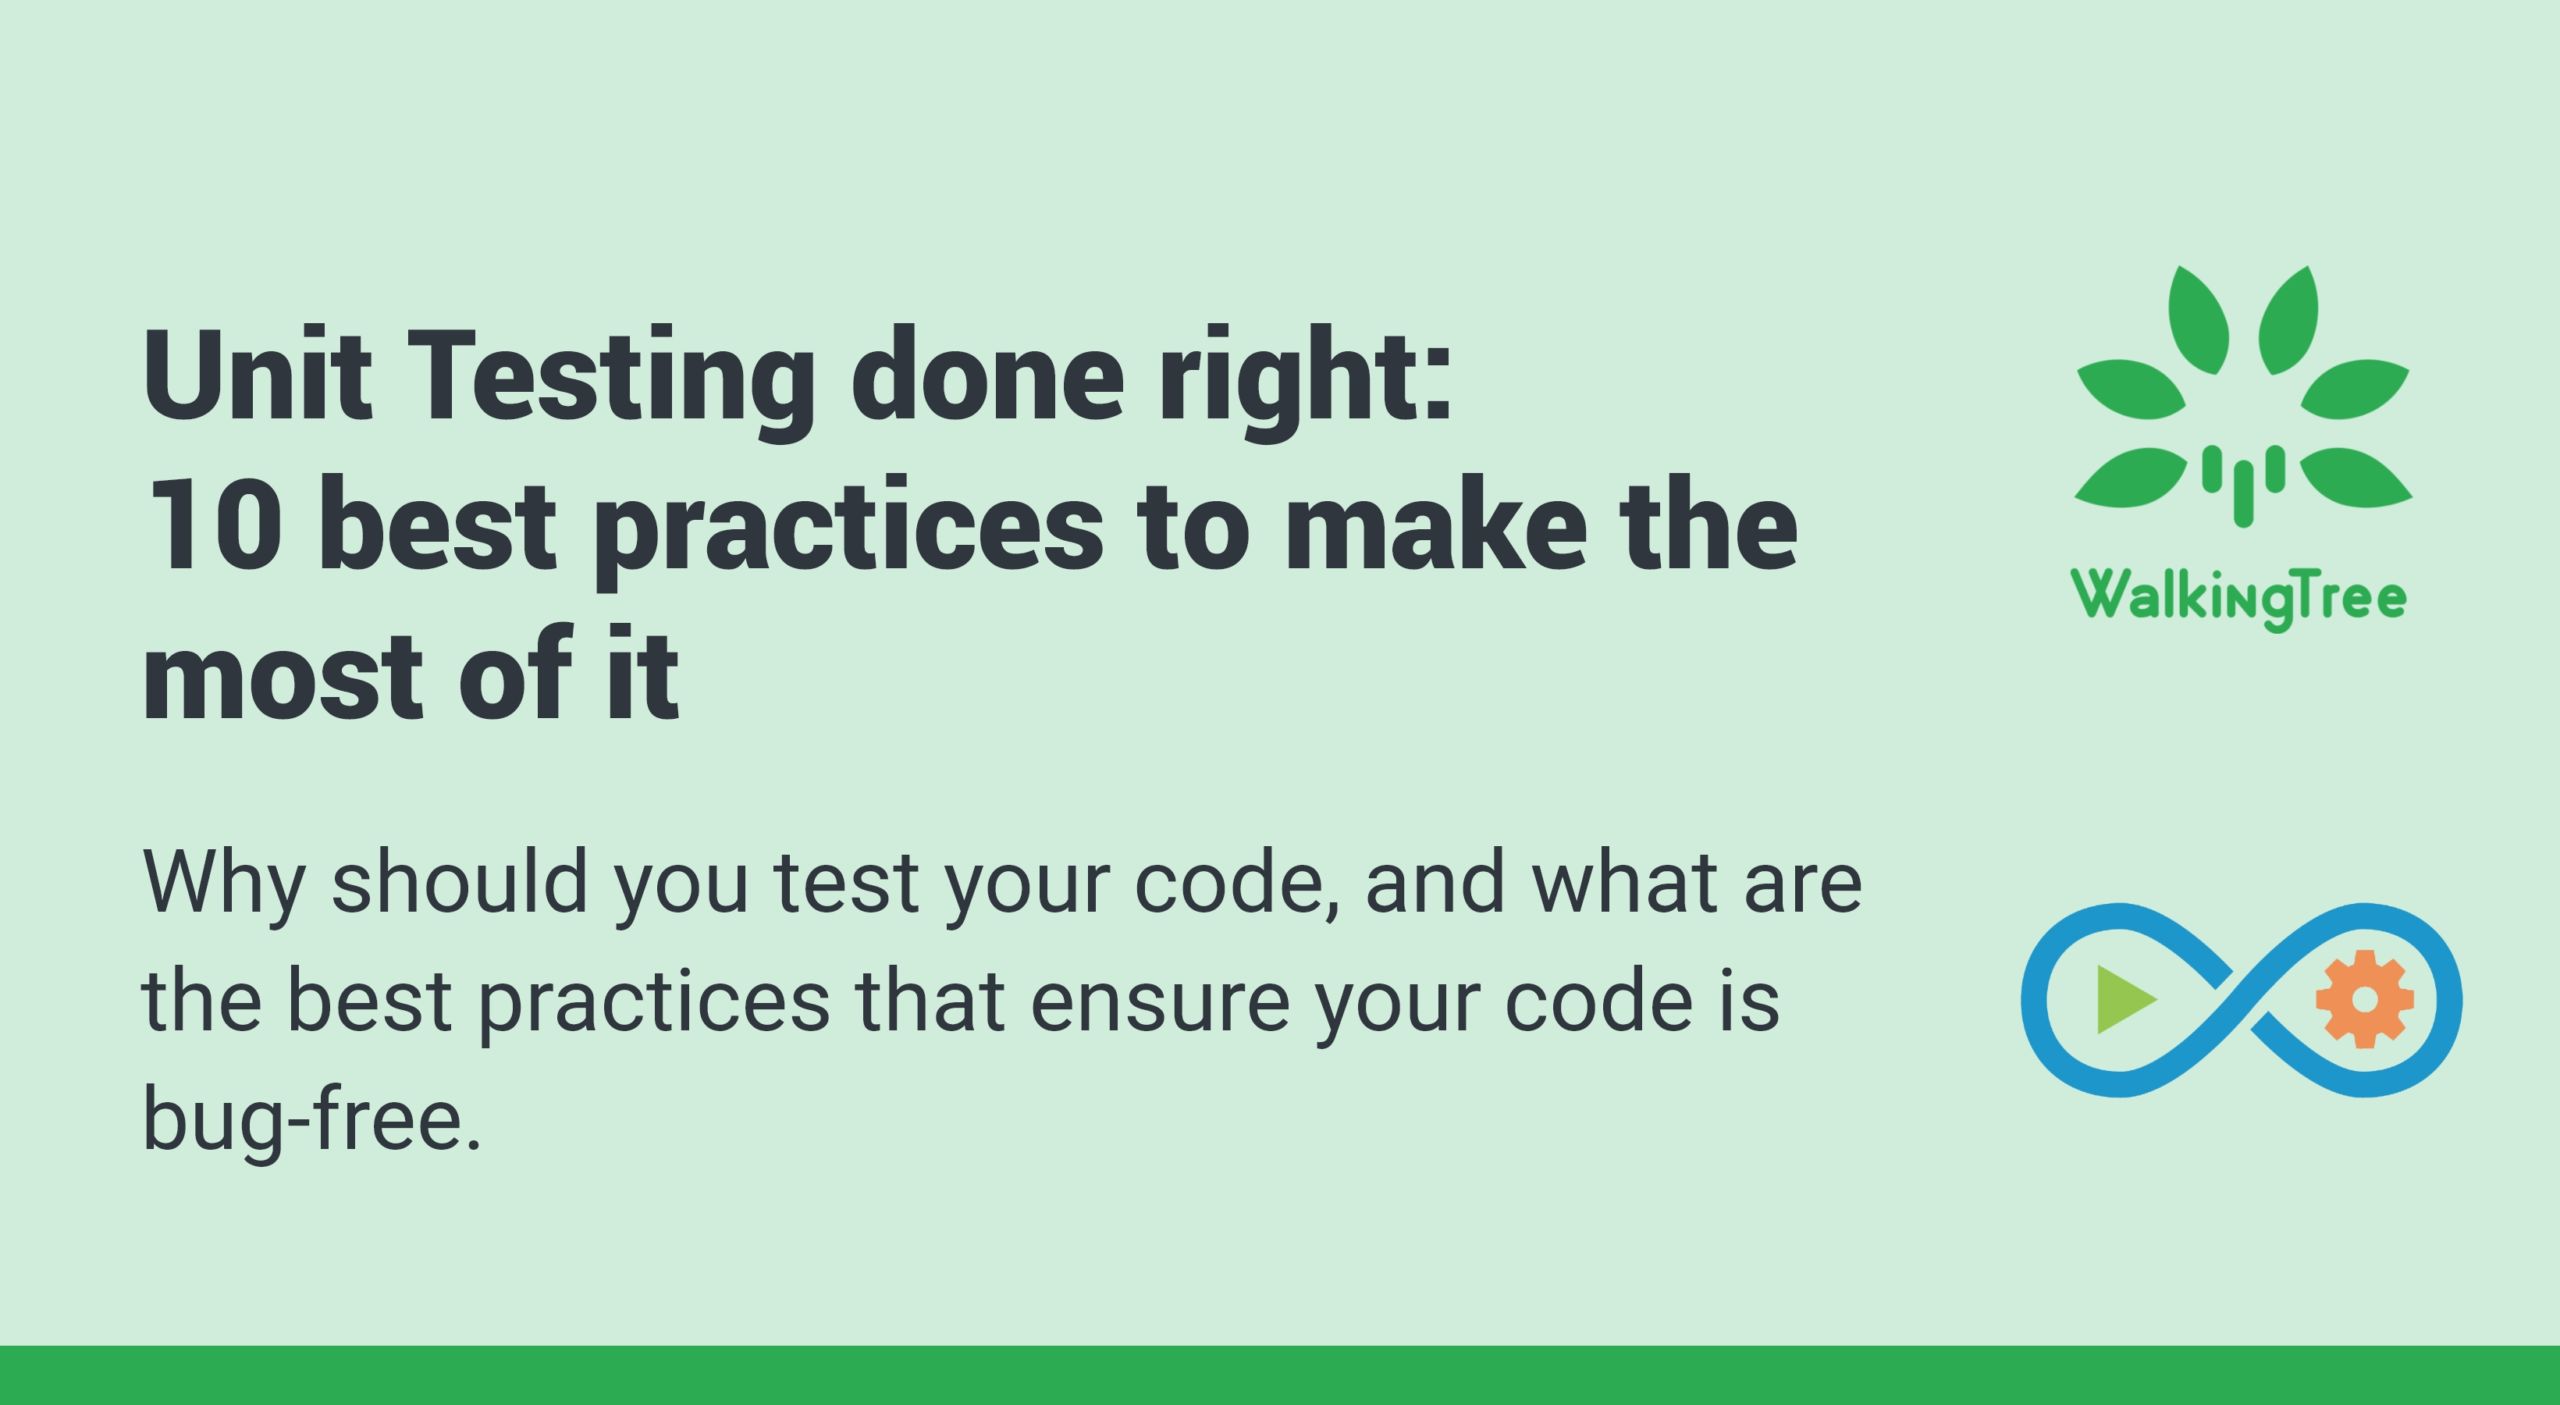  Unit Testing done right10 best practices to make the most of it